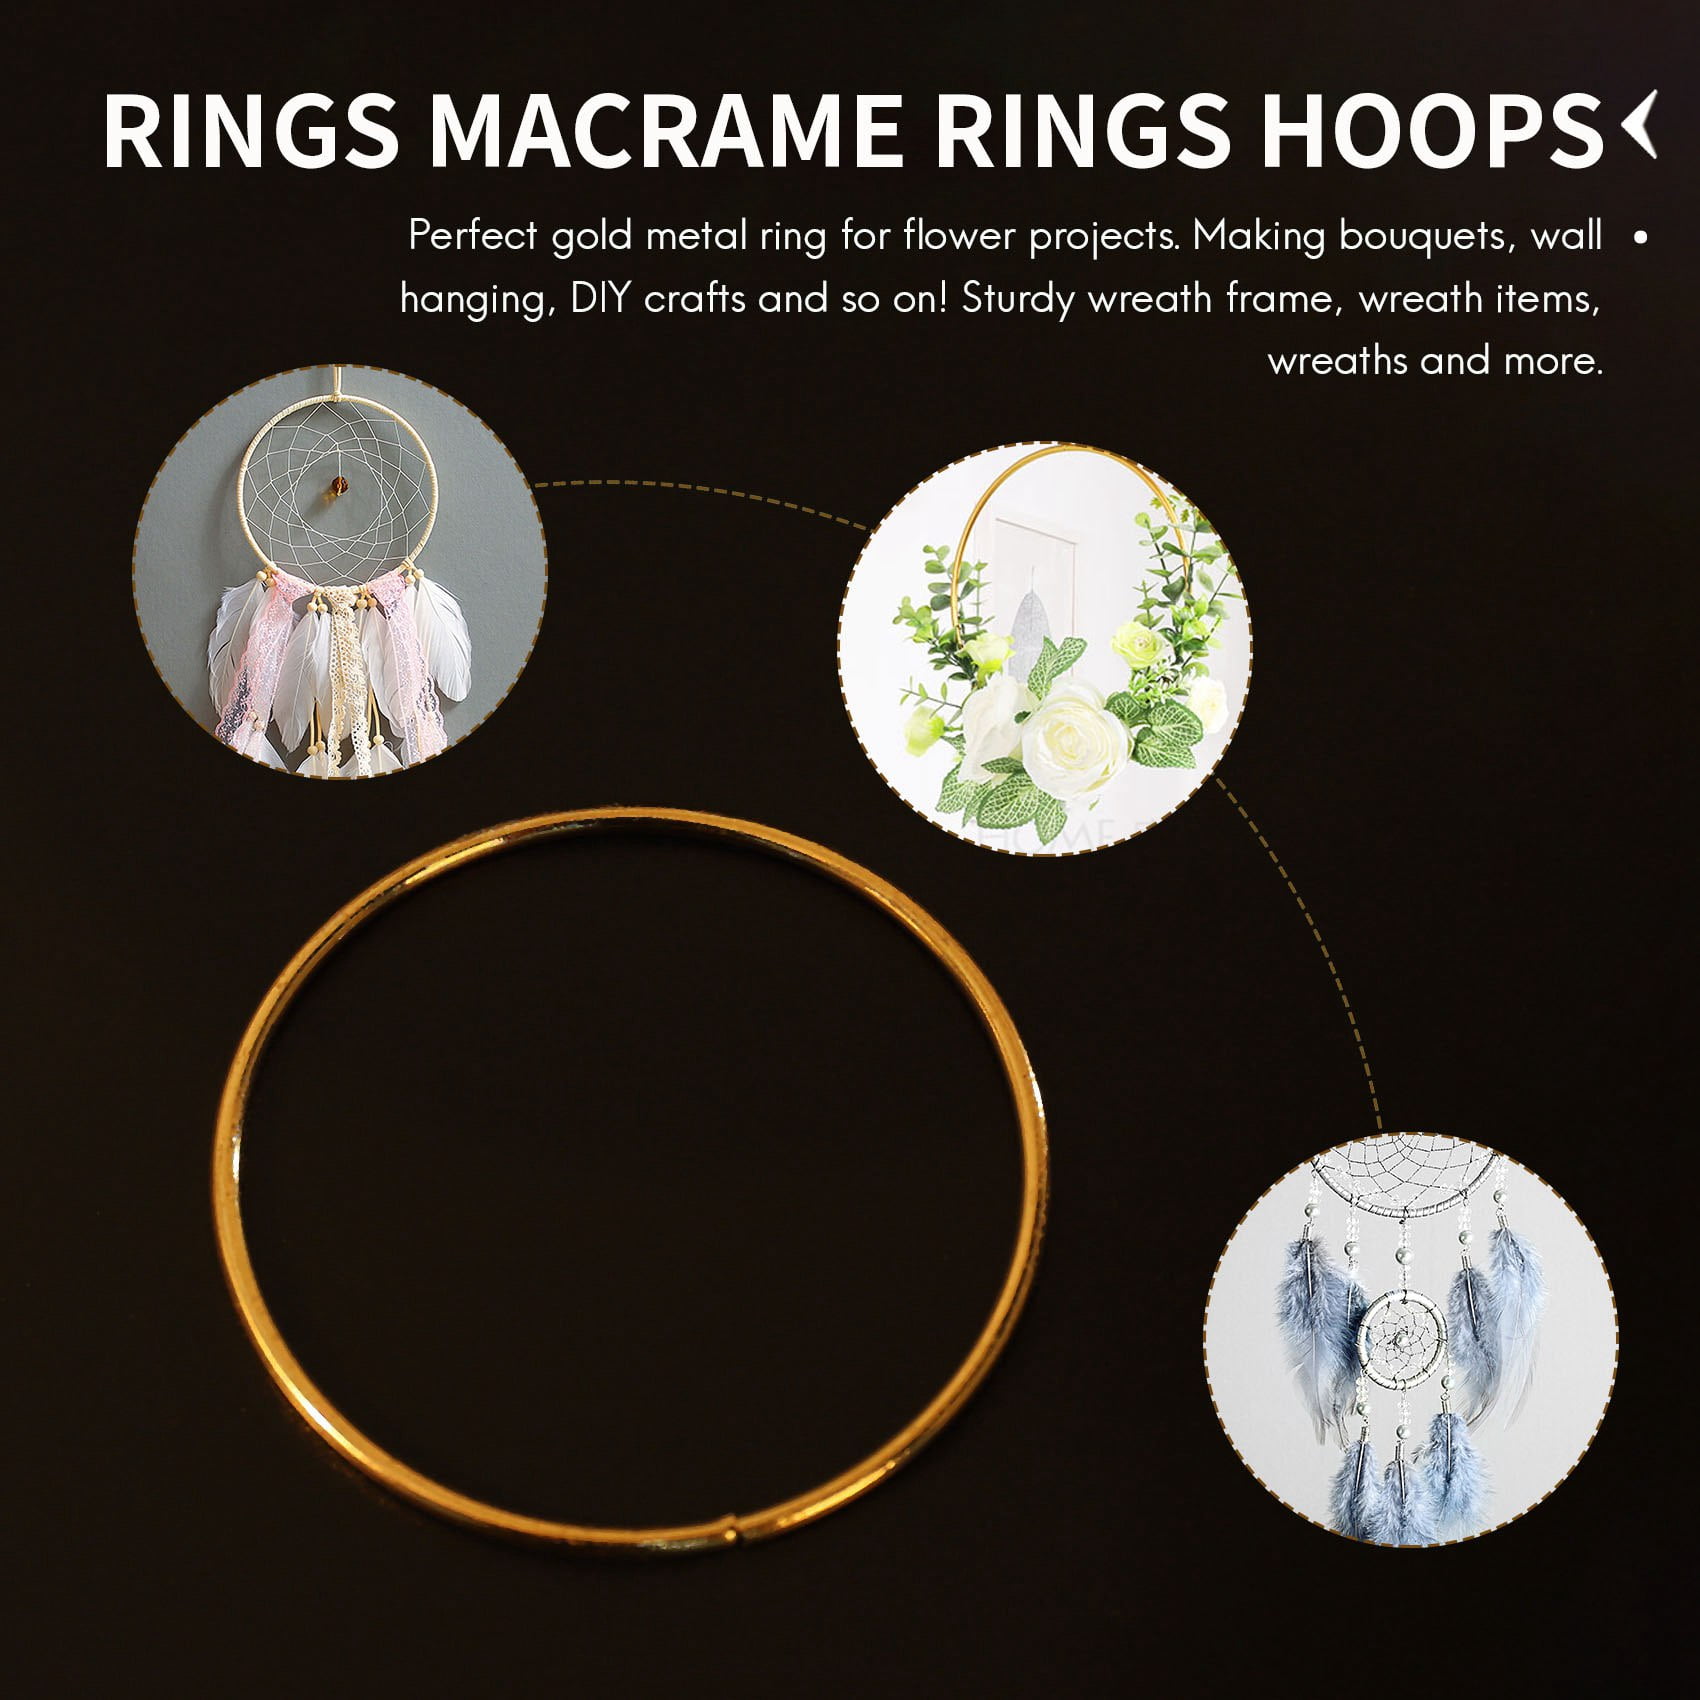 TEHAUX 3PCS DIY Dreamcatcher Crafting Hoops Dreamcatcher Ring Cross Stitch  Hoop Metal Hoops for Crafts Embroidery Ring Circle Metal Hoop Rings Silver